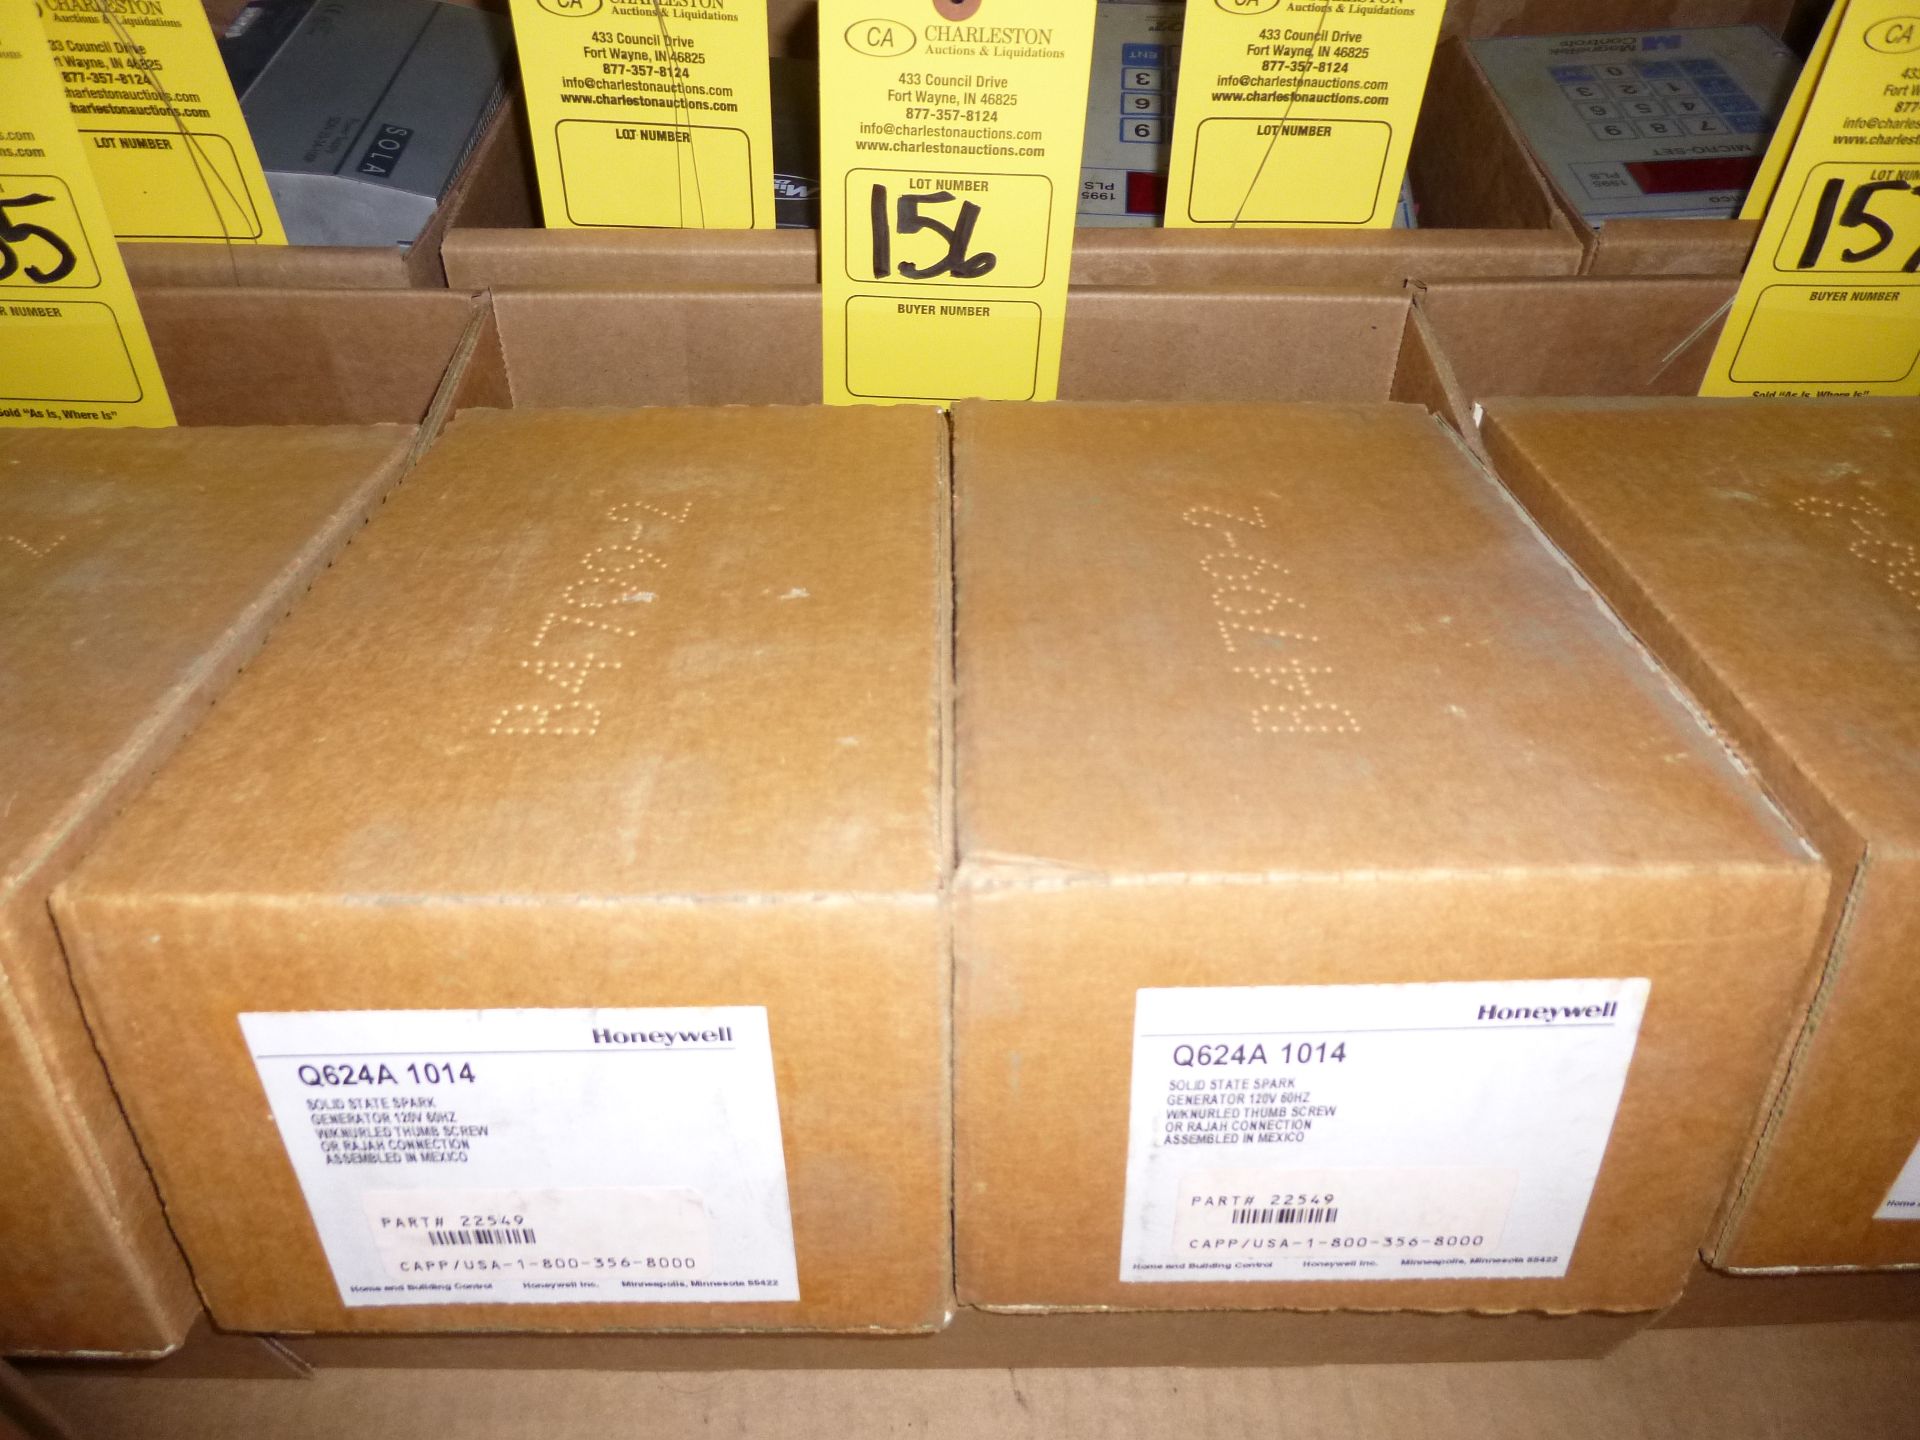 Qty 2 Honeywell Q624A-1014, new in boxes, as always with Brolyn LLC auctions, all lots can be picked